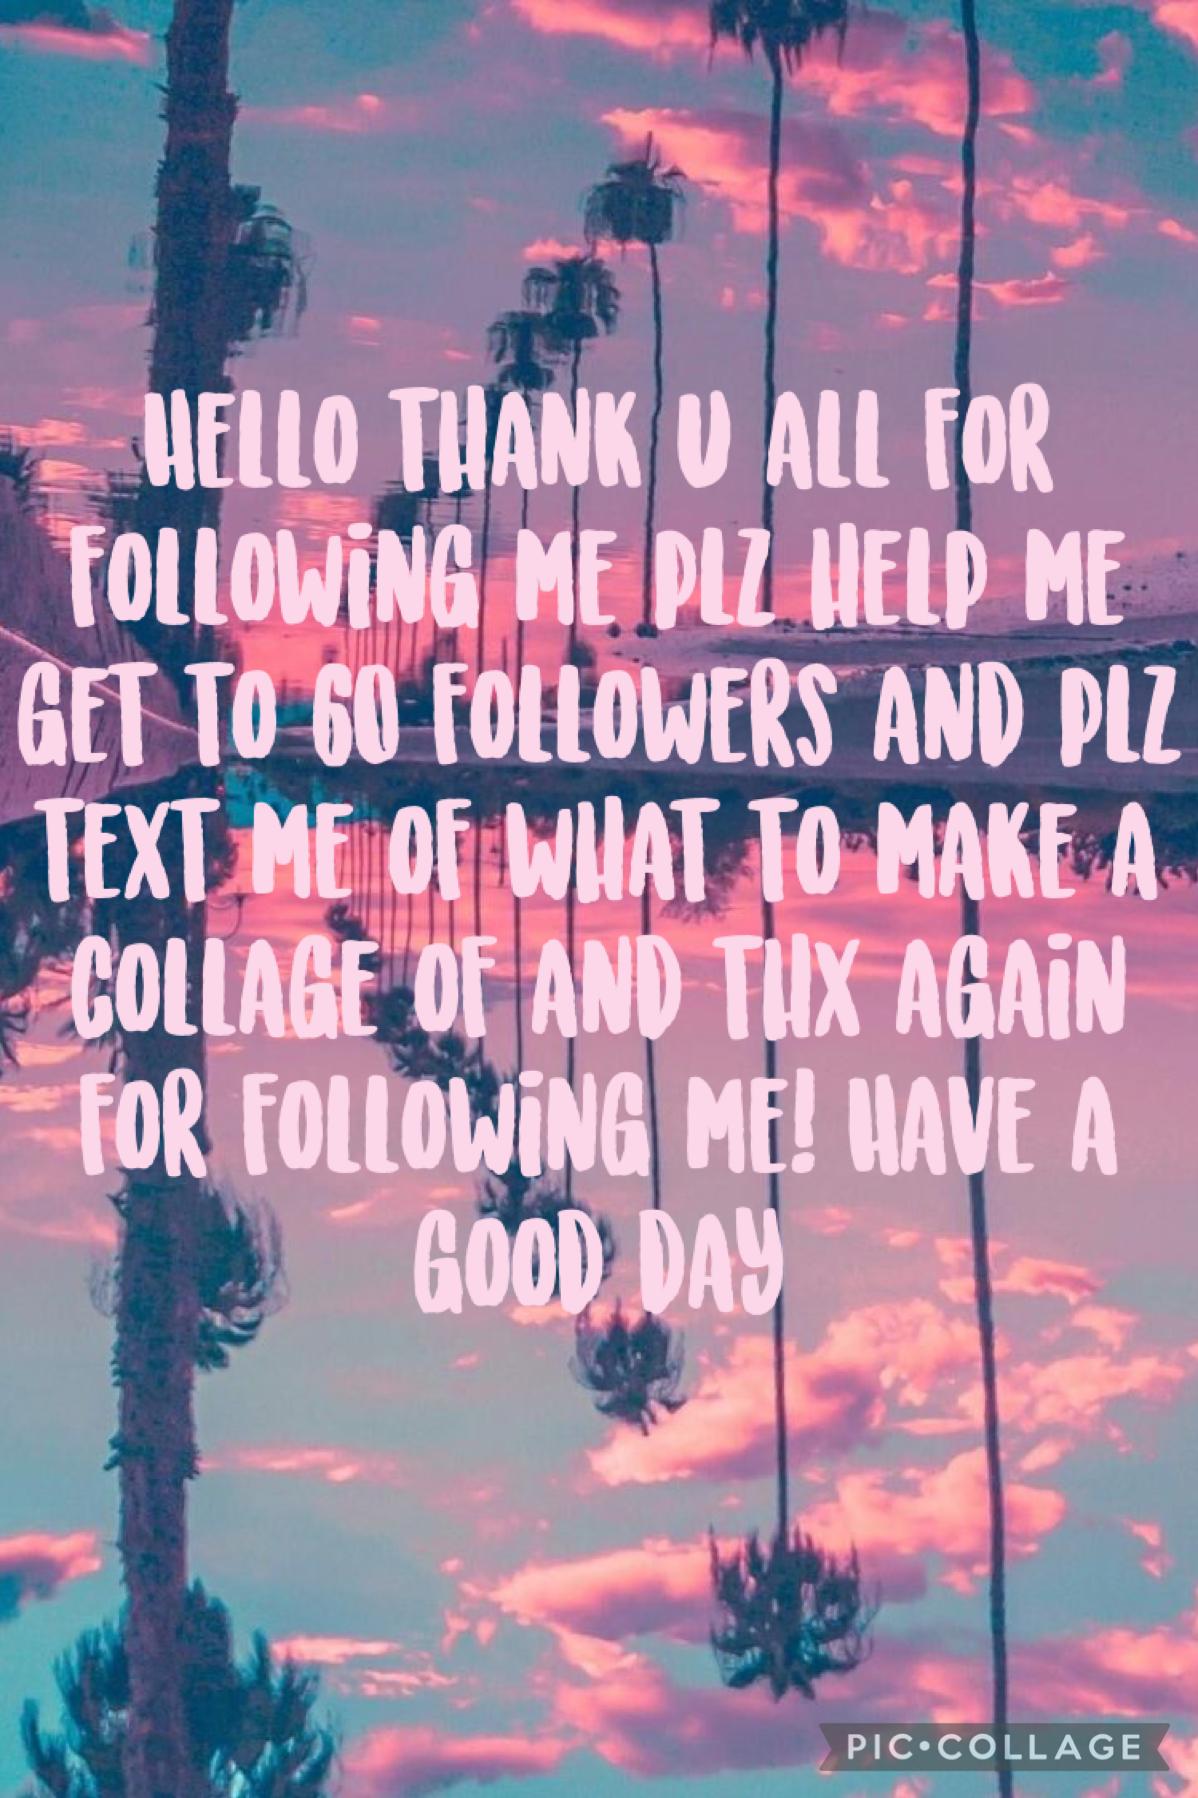 Thank u all for following me